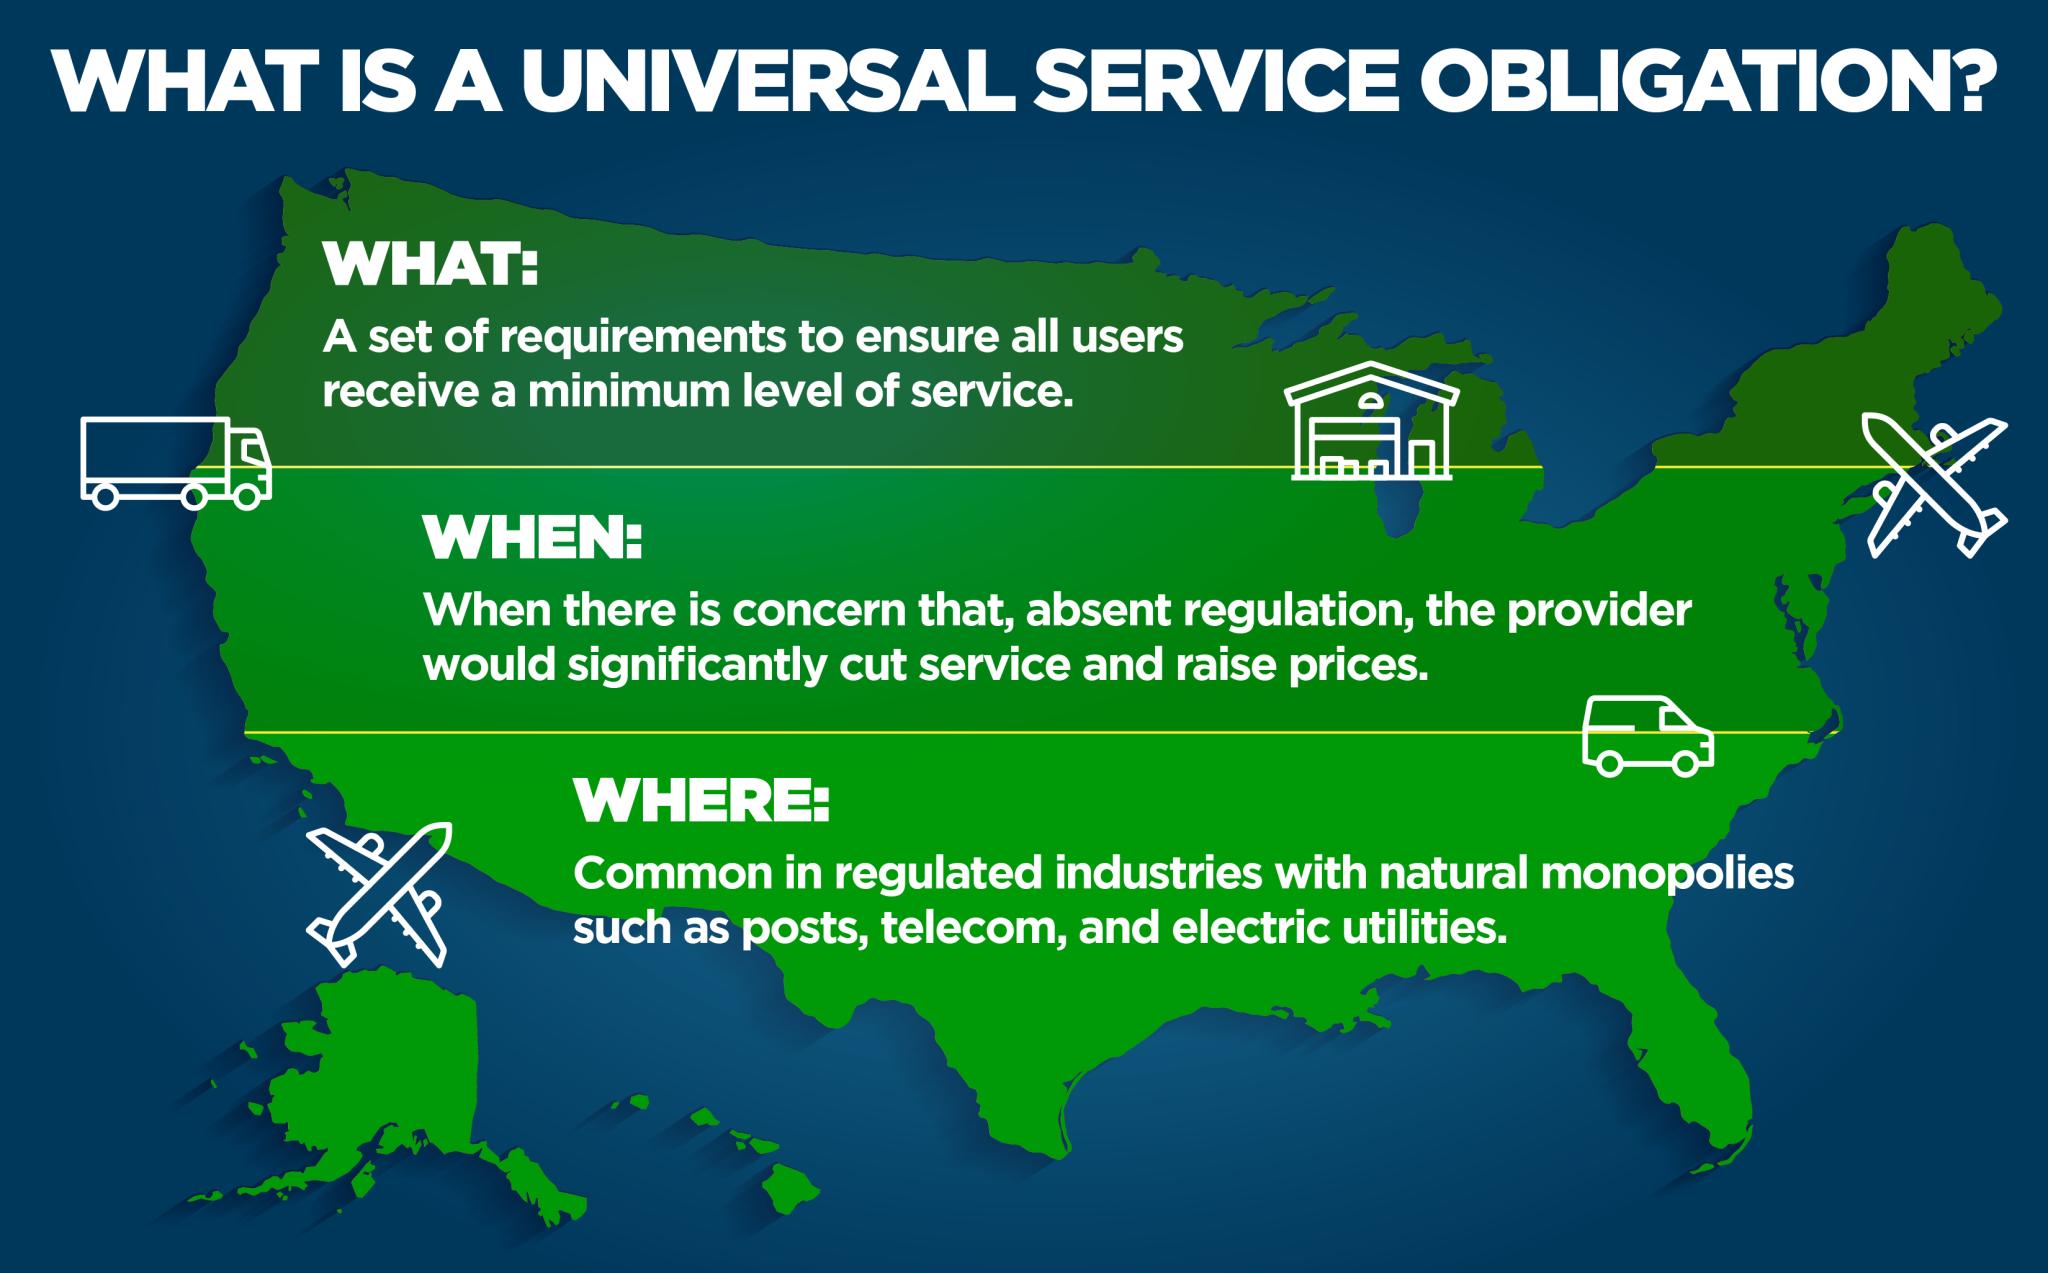 What is a Universal Service Obligation